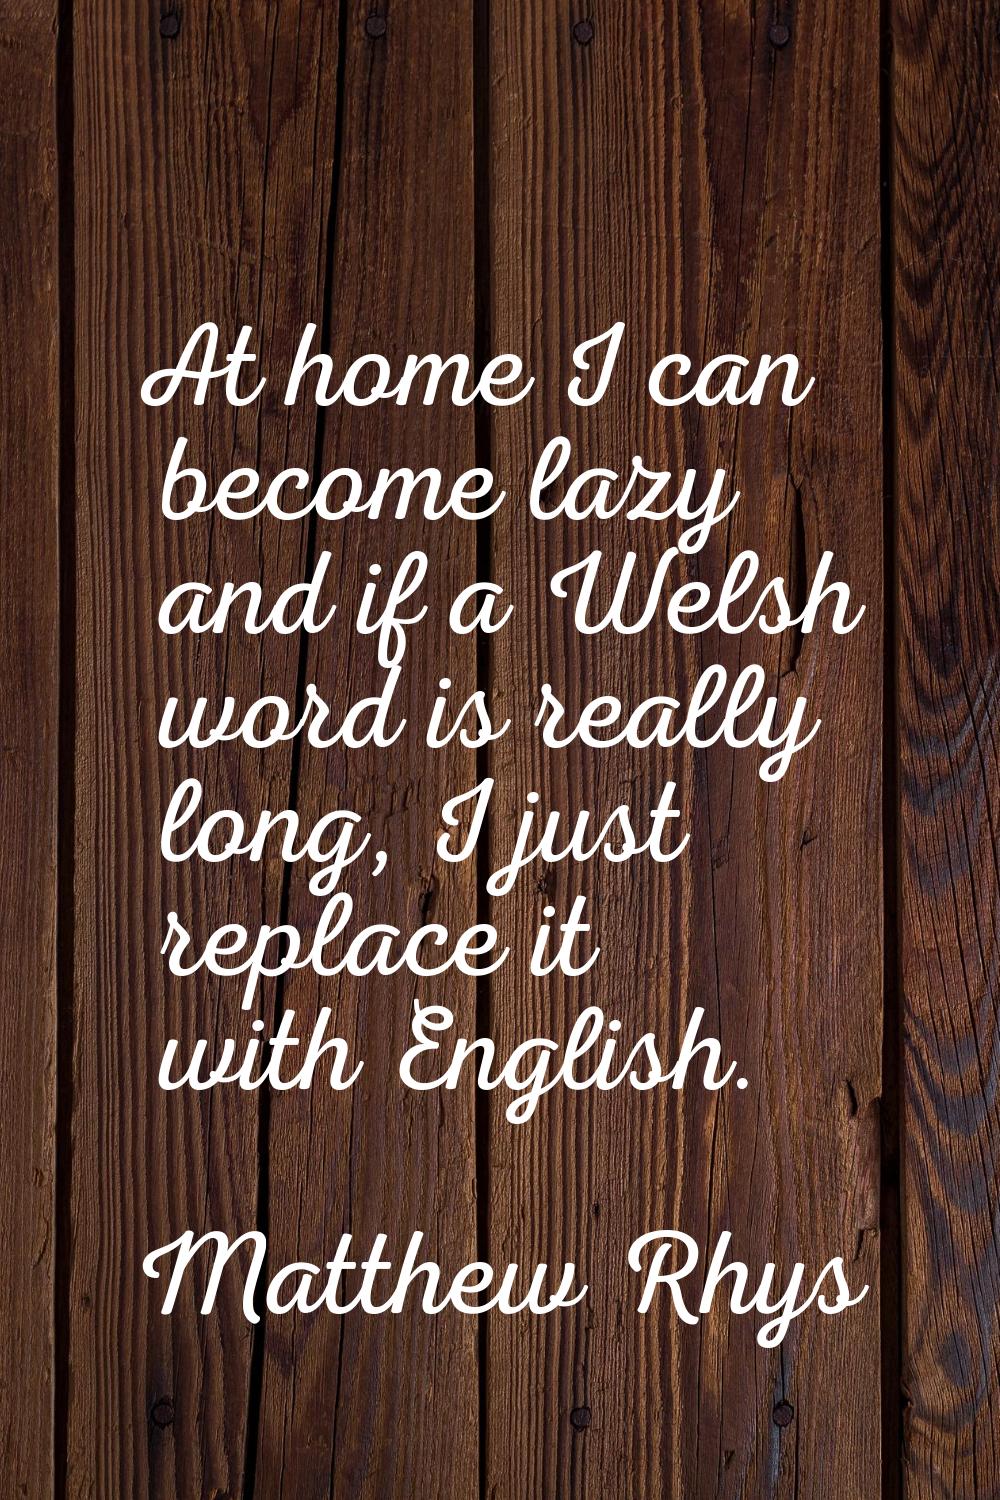 At home I can become lazy and if a Welsh word is really long, I just replace it with English.